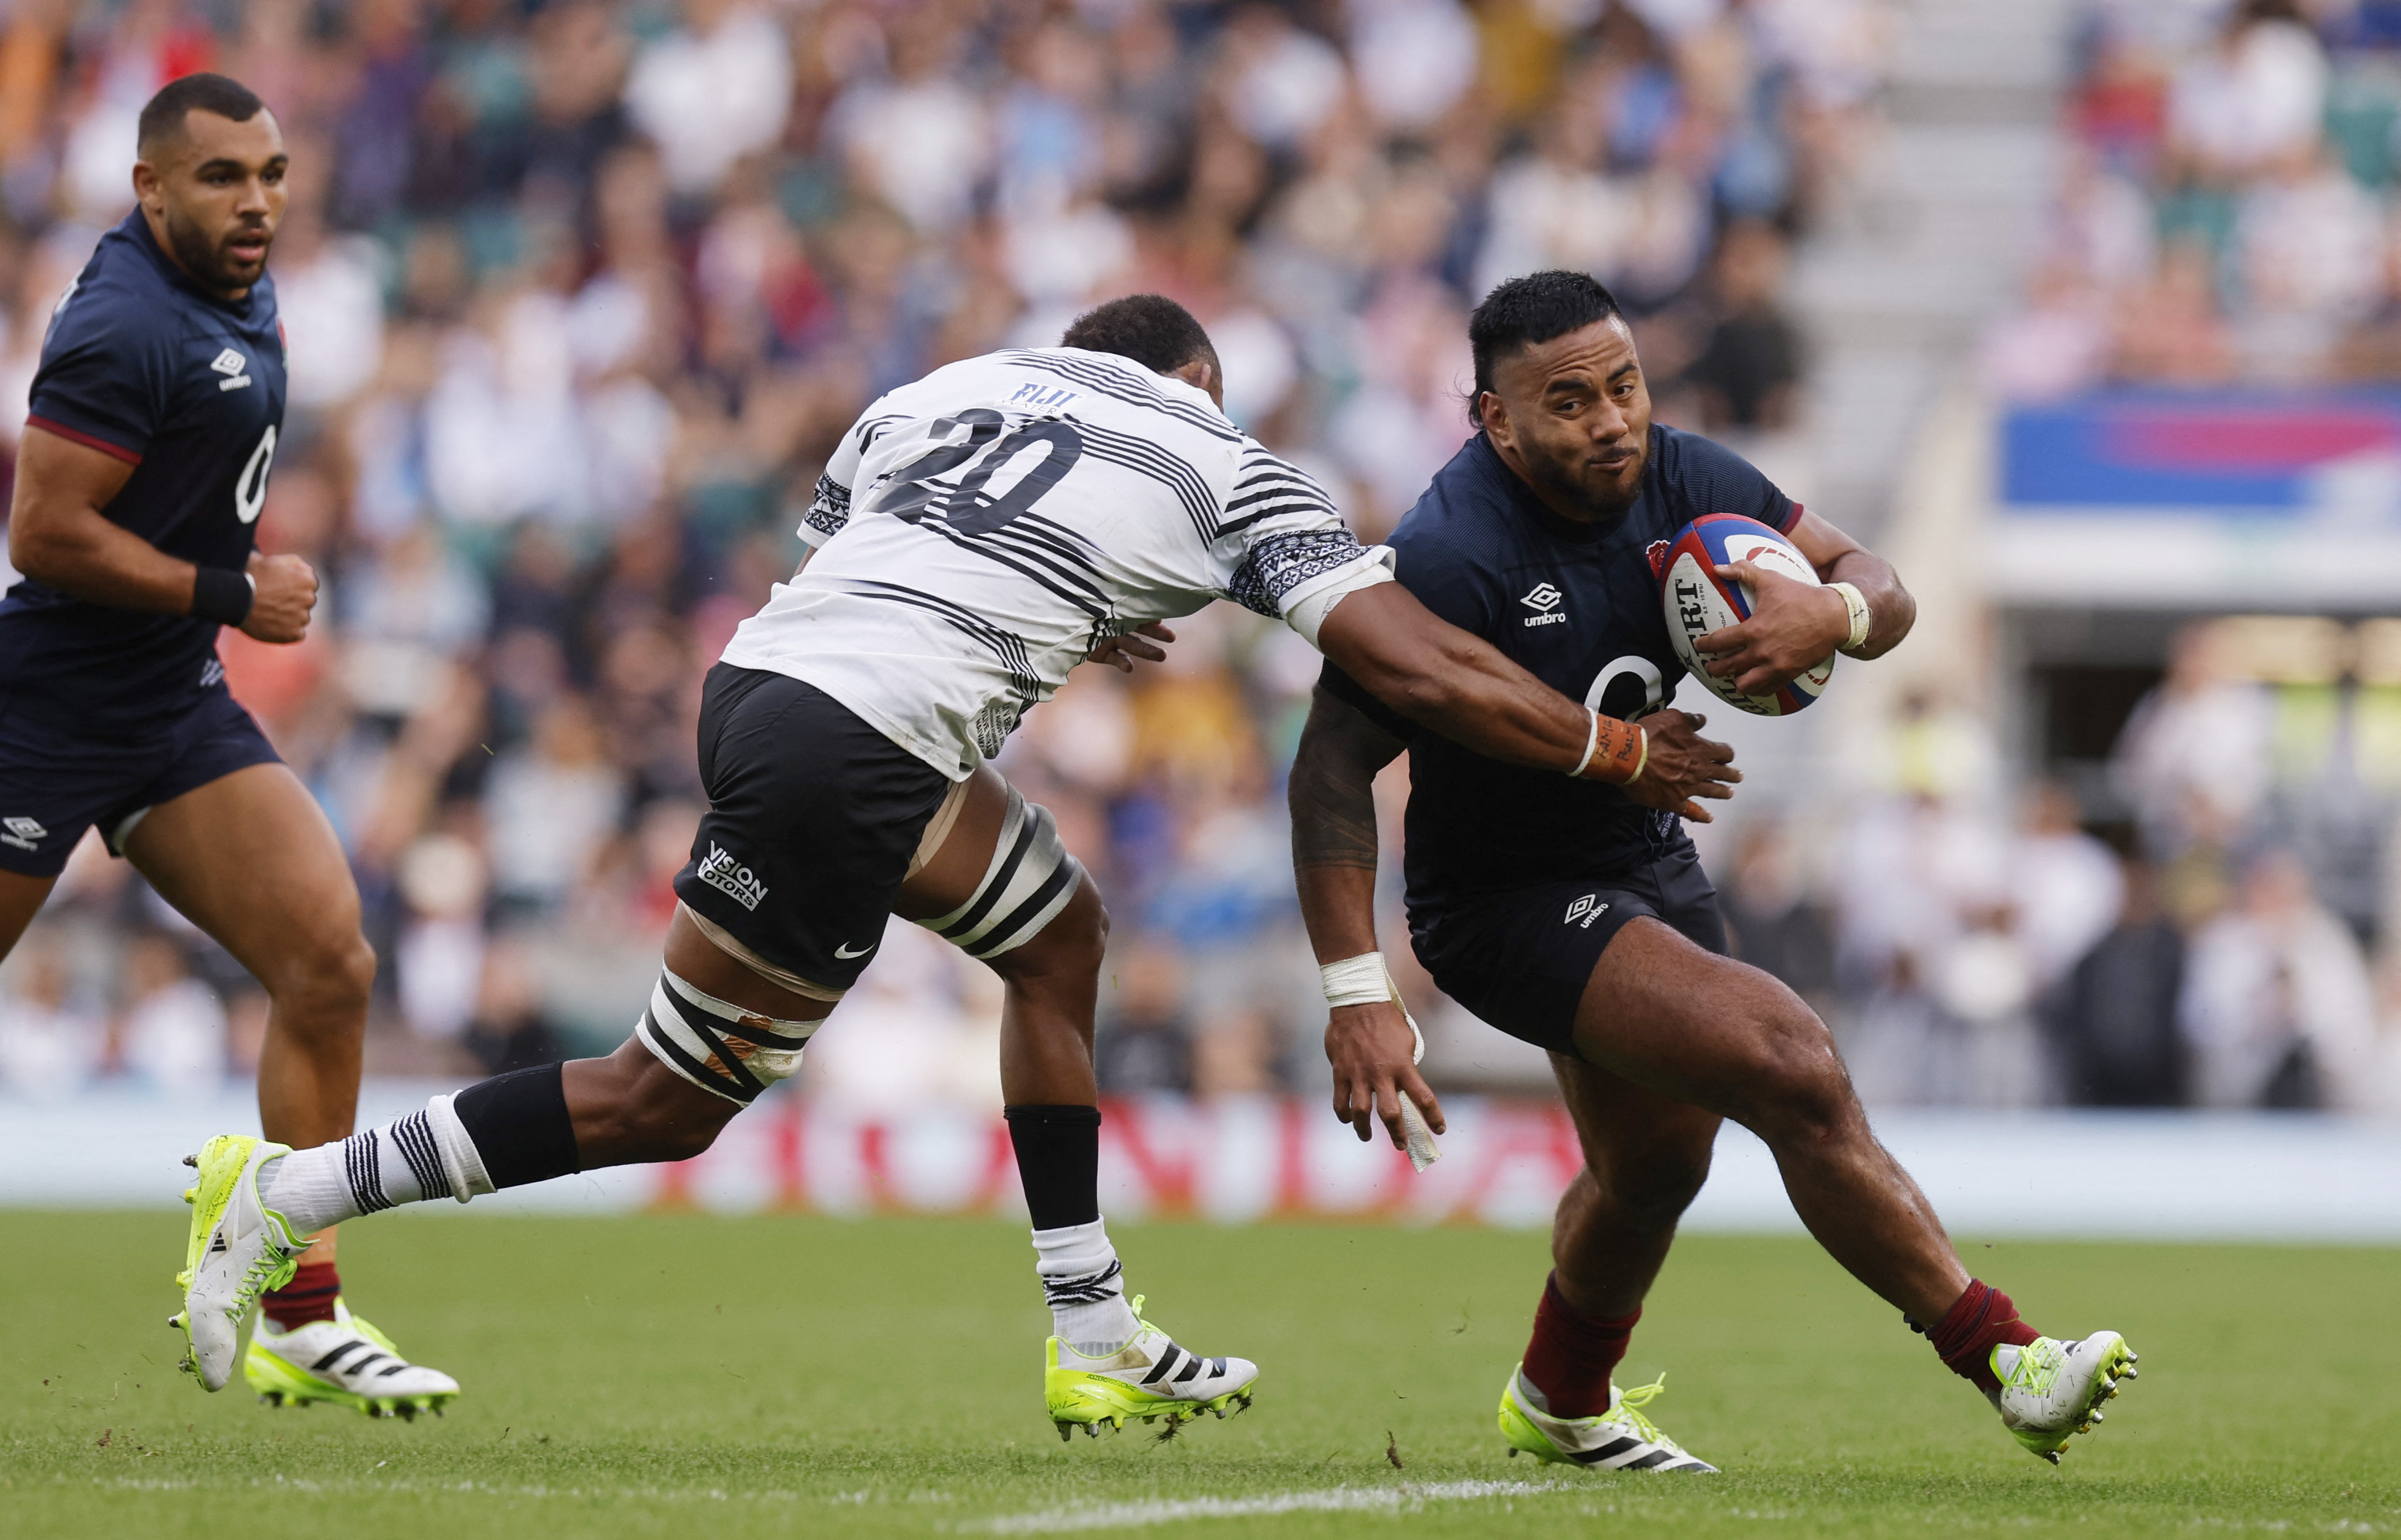 England hit rock bottom with first-ever defeat by Fiji Reuters